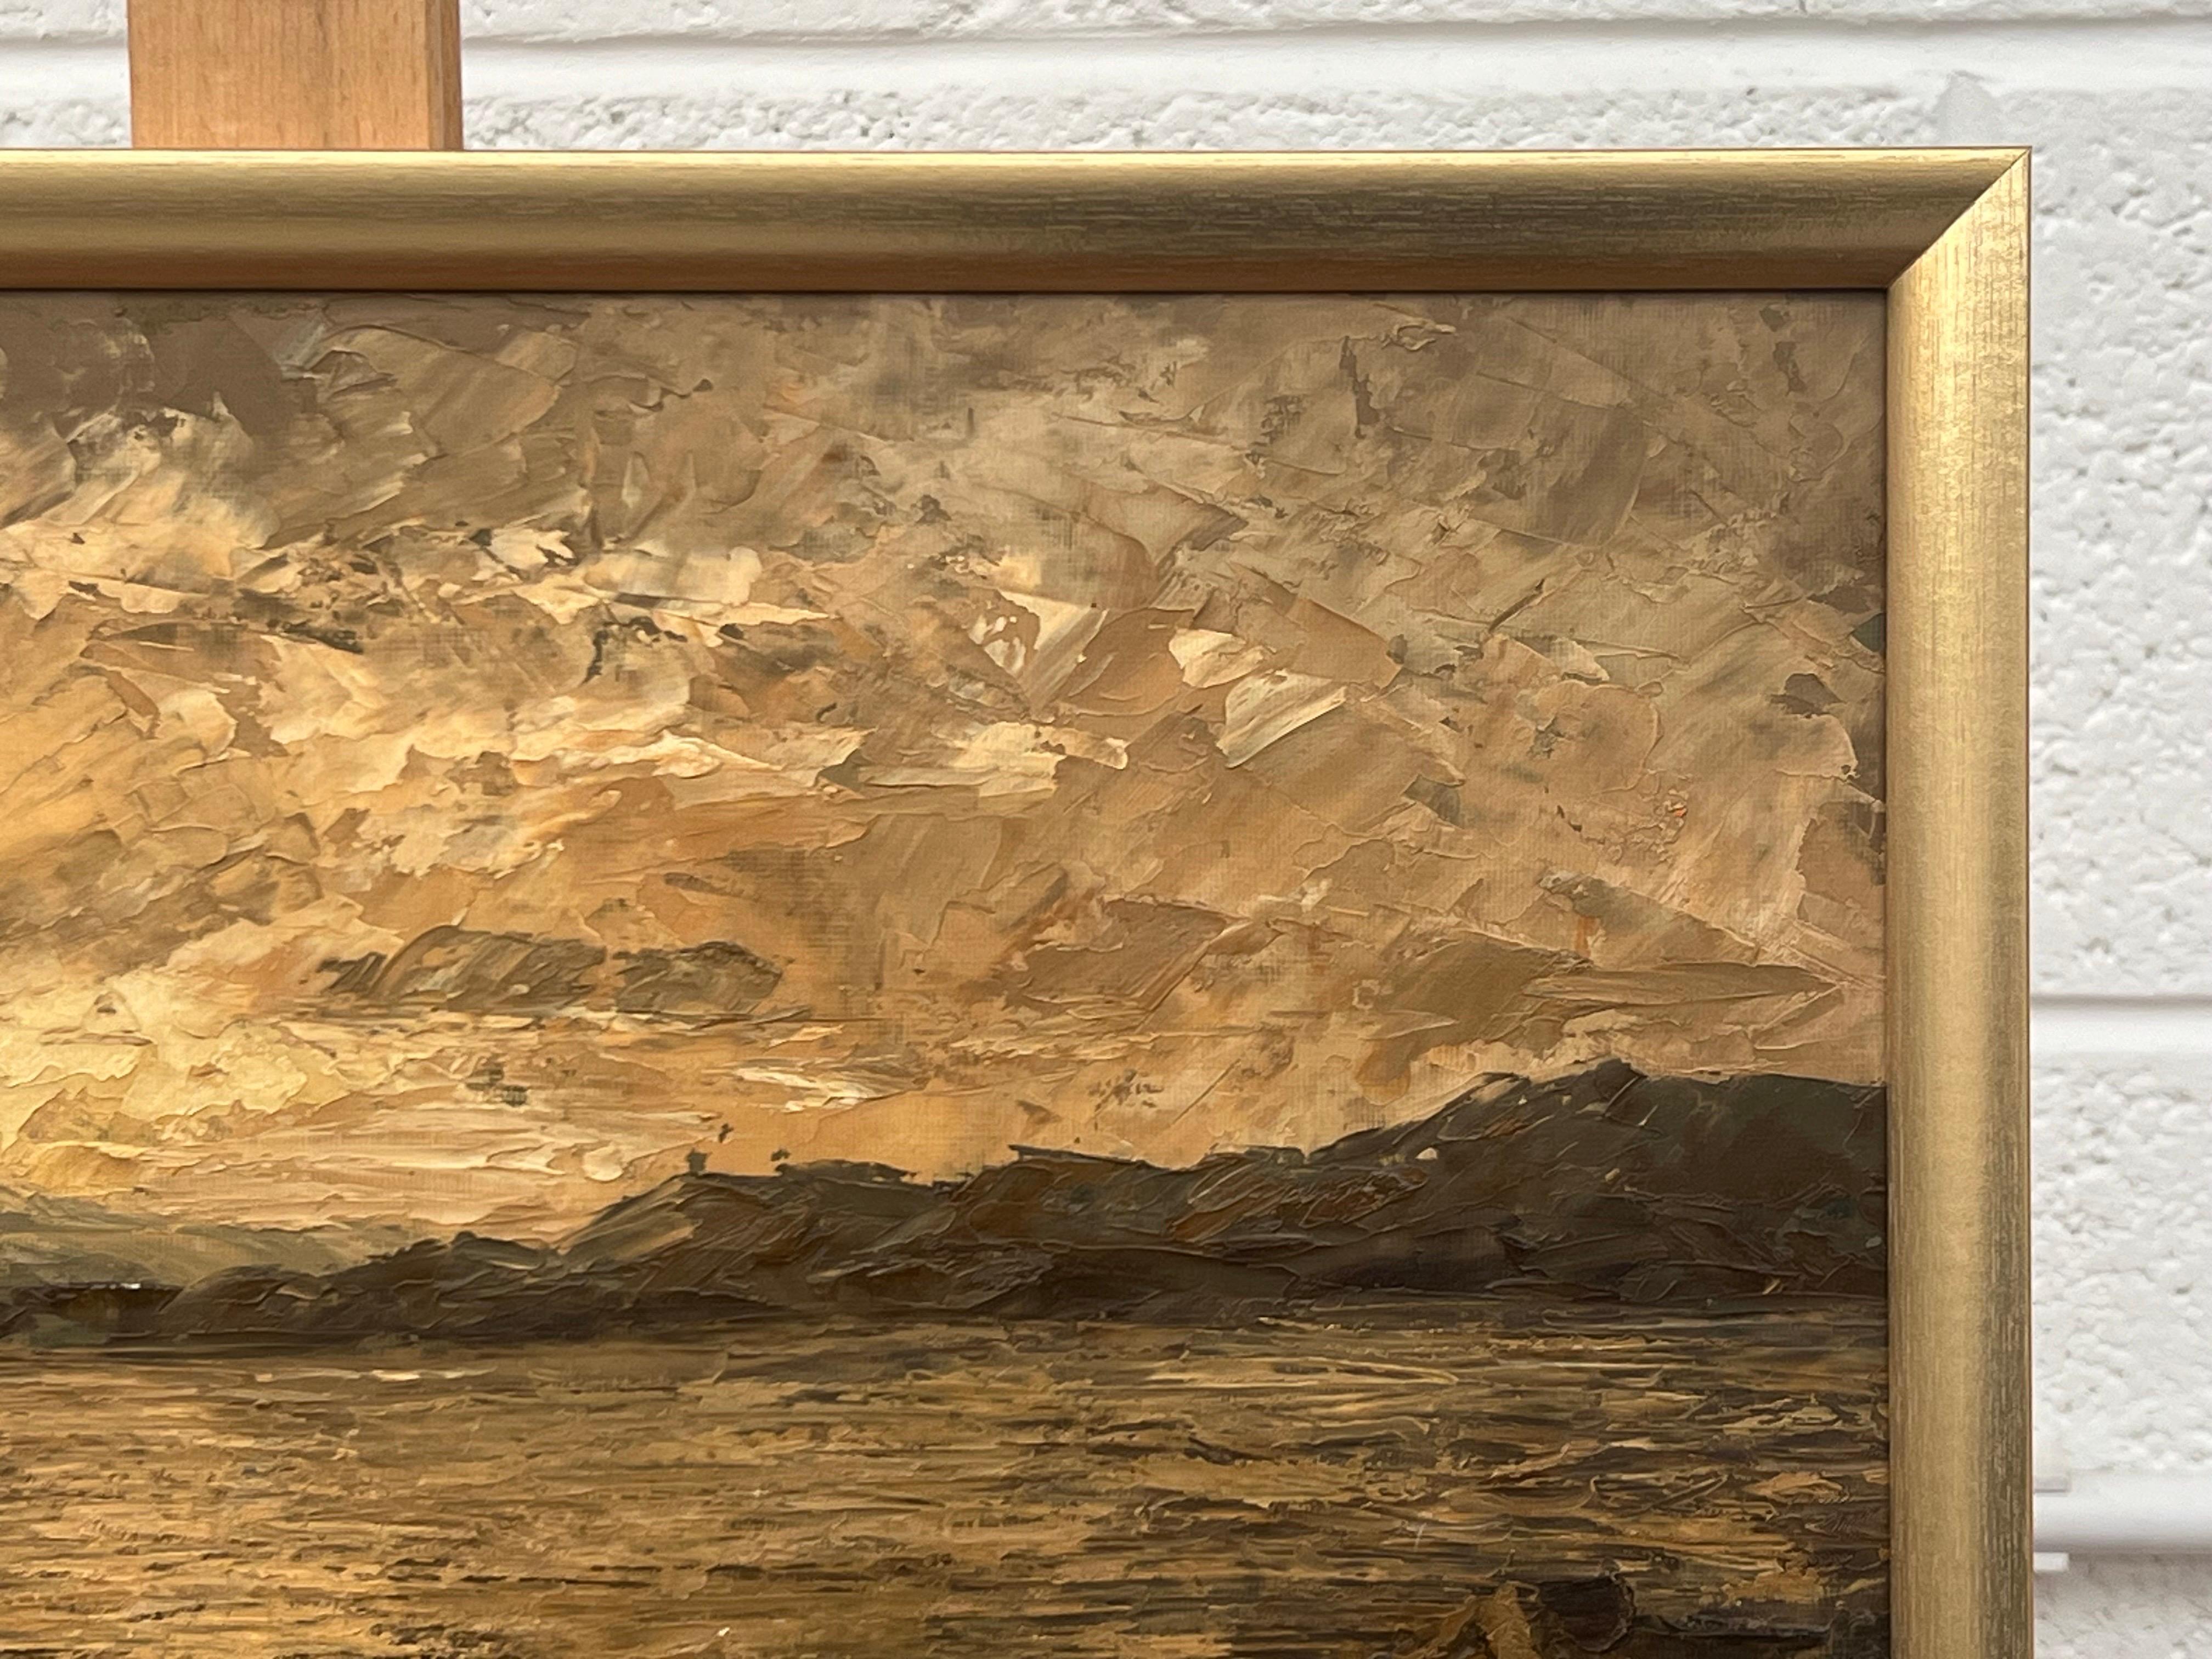 Atmospheric Seascape Sunset Landscape Impasto Oil Painting by 20thCentury Artist For Sale 6